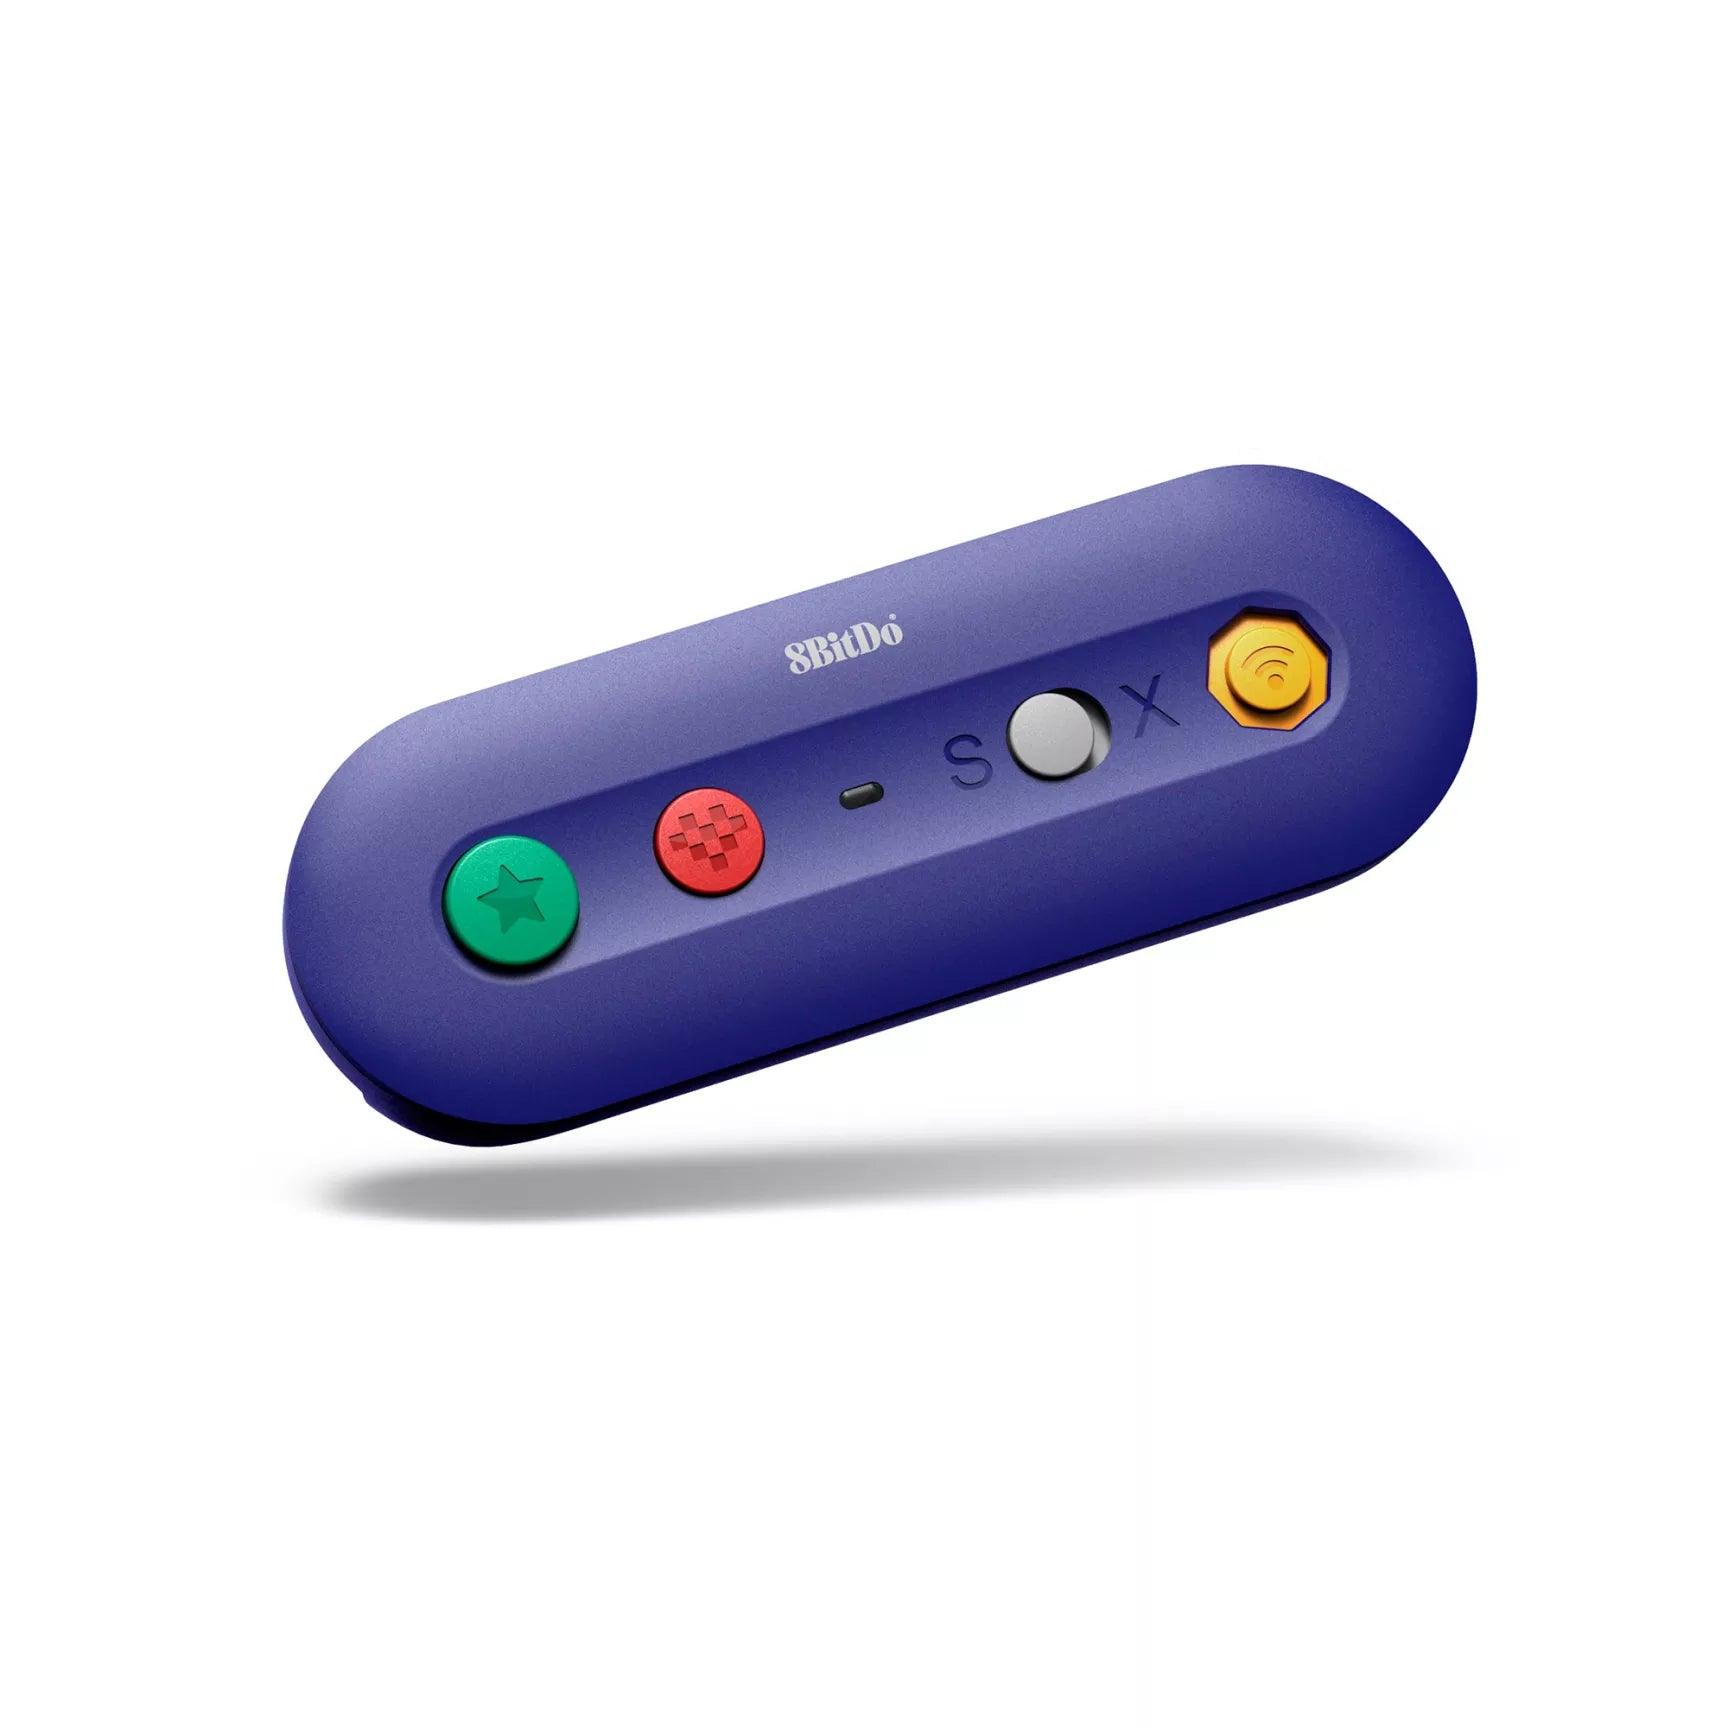 8BitDo GBros Wireless Adapter for NES SNES SF-C Classic Edition Wii Classic for Nintendo Switch Gamecube - 8bitdo